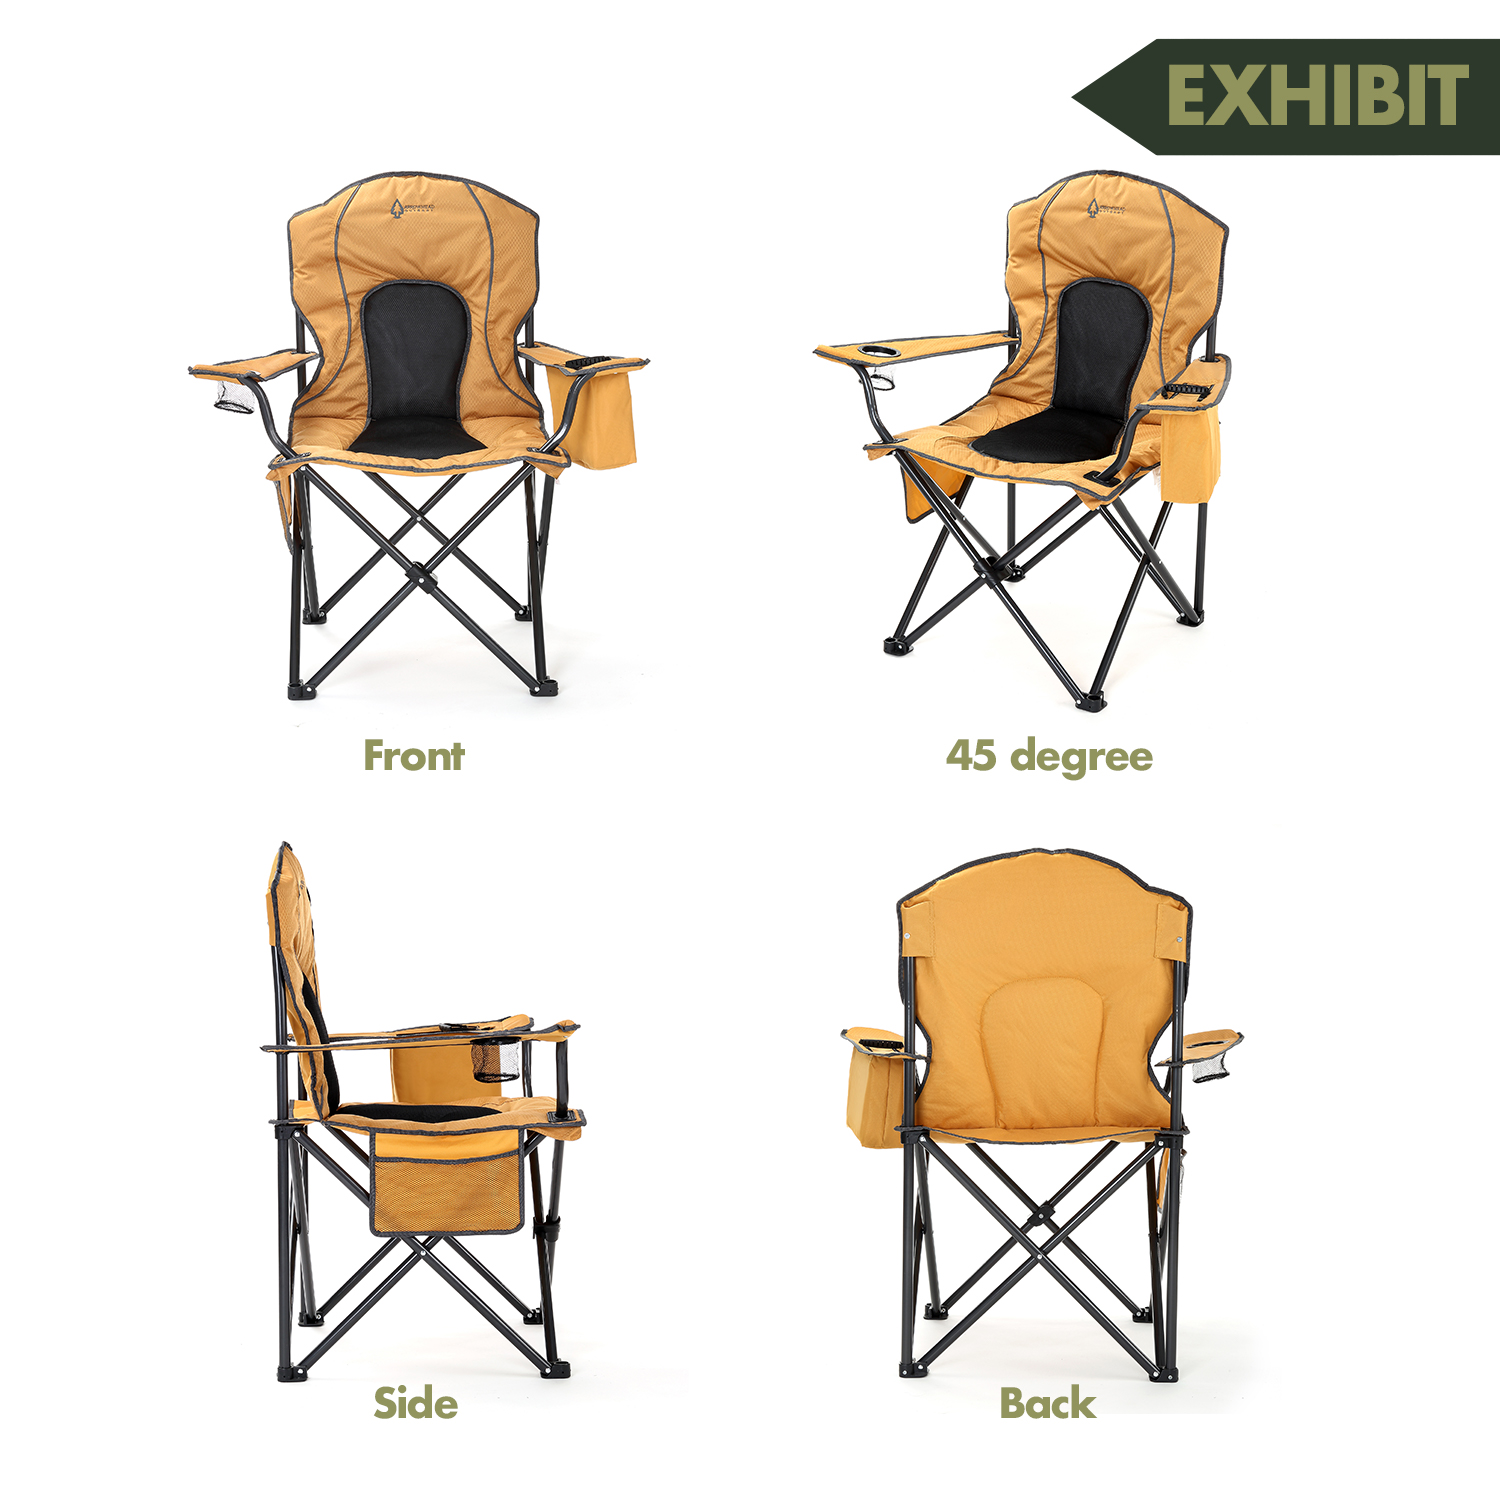 ARROWHEAD OUTDOOR Portable Folding Camping Quad Chair w/ 4-Can Cooler, Cup- Holder, Heavy-Duty Carrying Bag w/ Easy Carry Shoulder Strap, Padded  Armrests, Supports up to 330lbs, USA-Based Support (Tan)